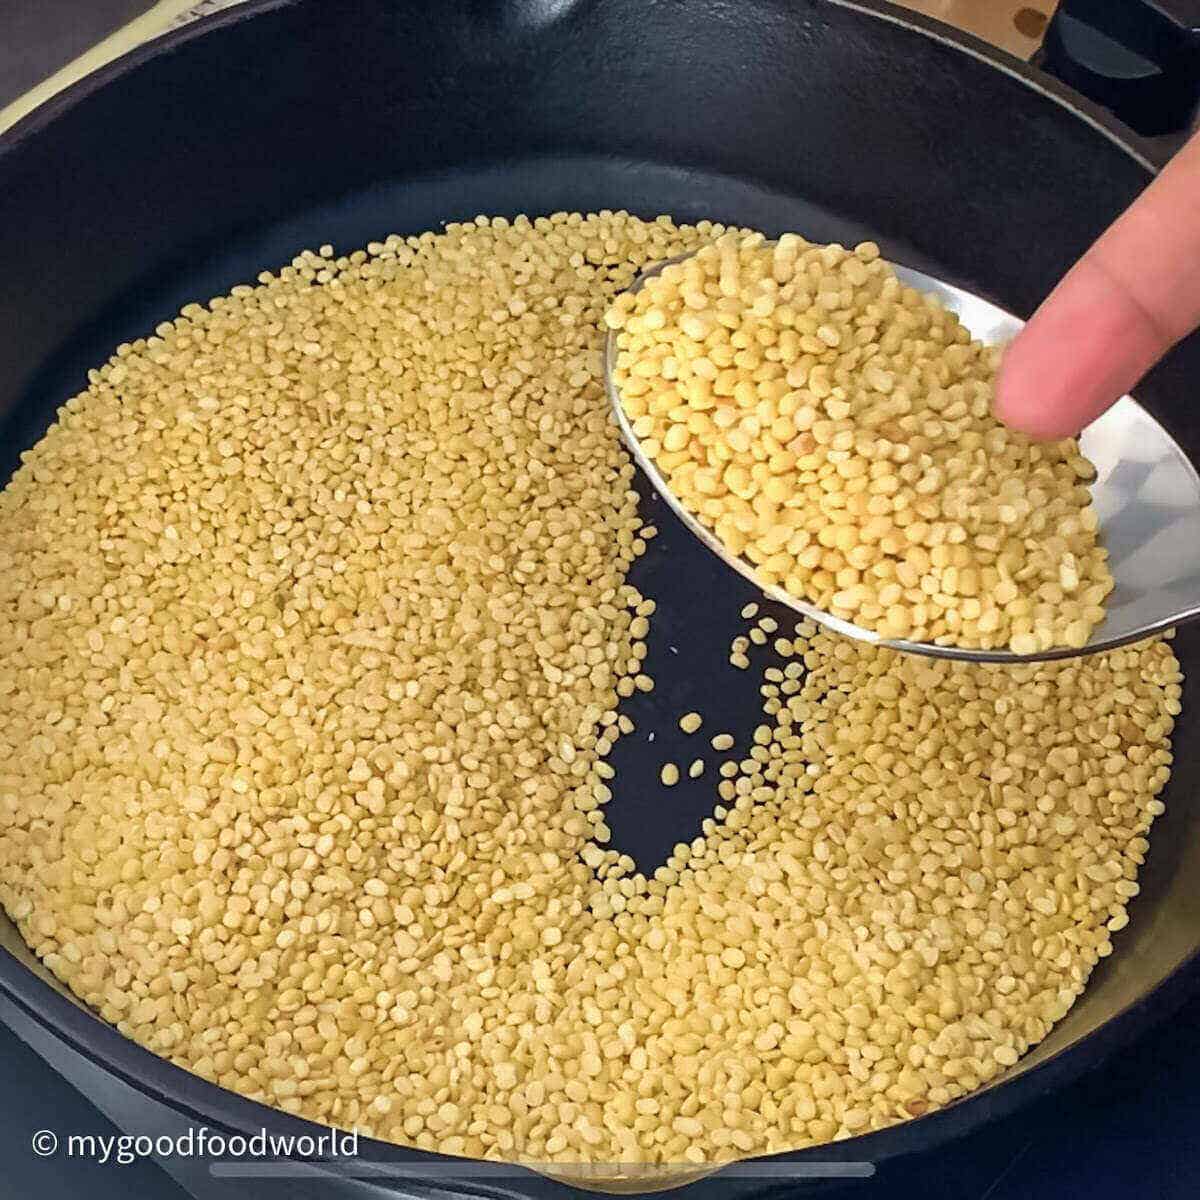 Roasting yellow lentils for moong dal soup.